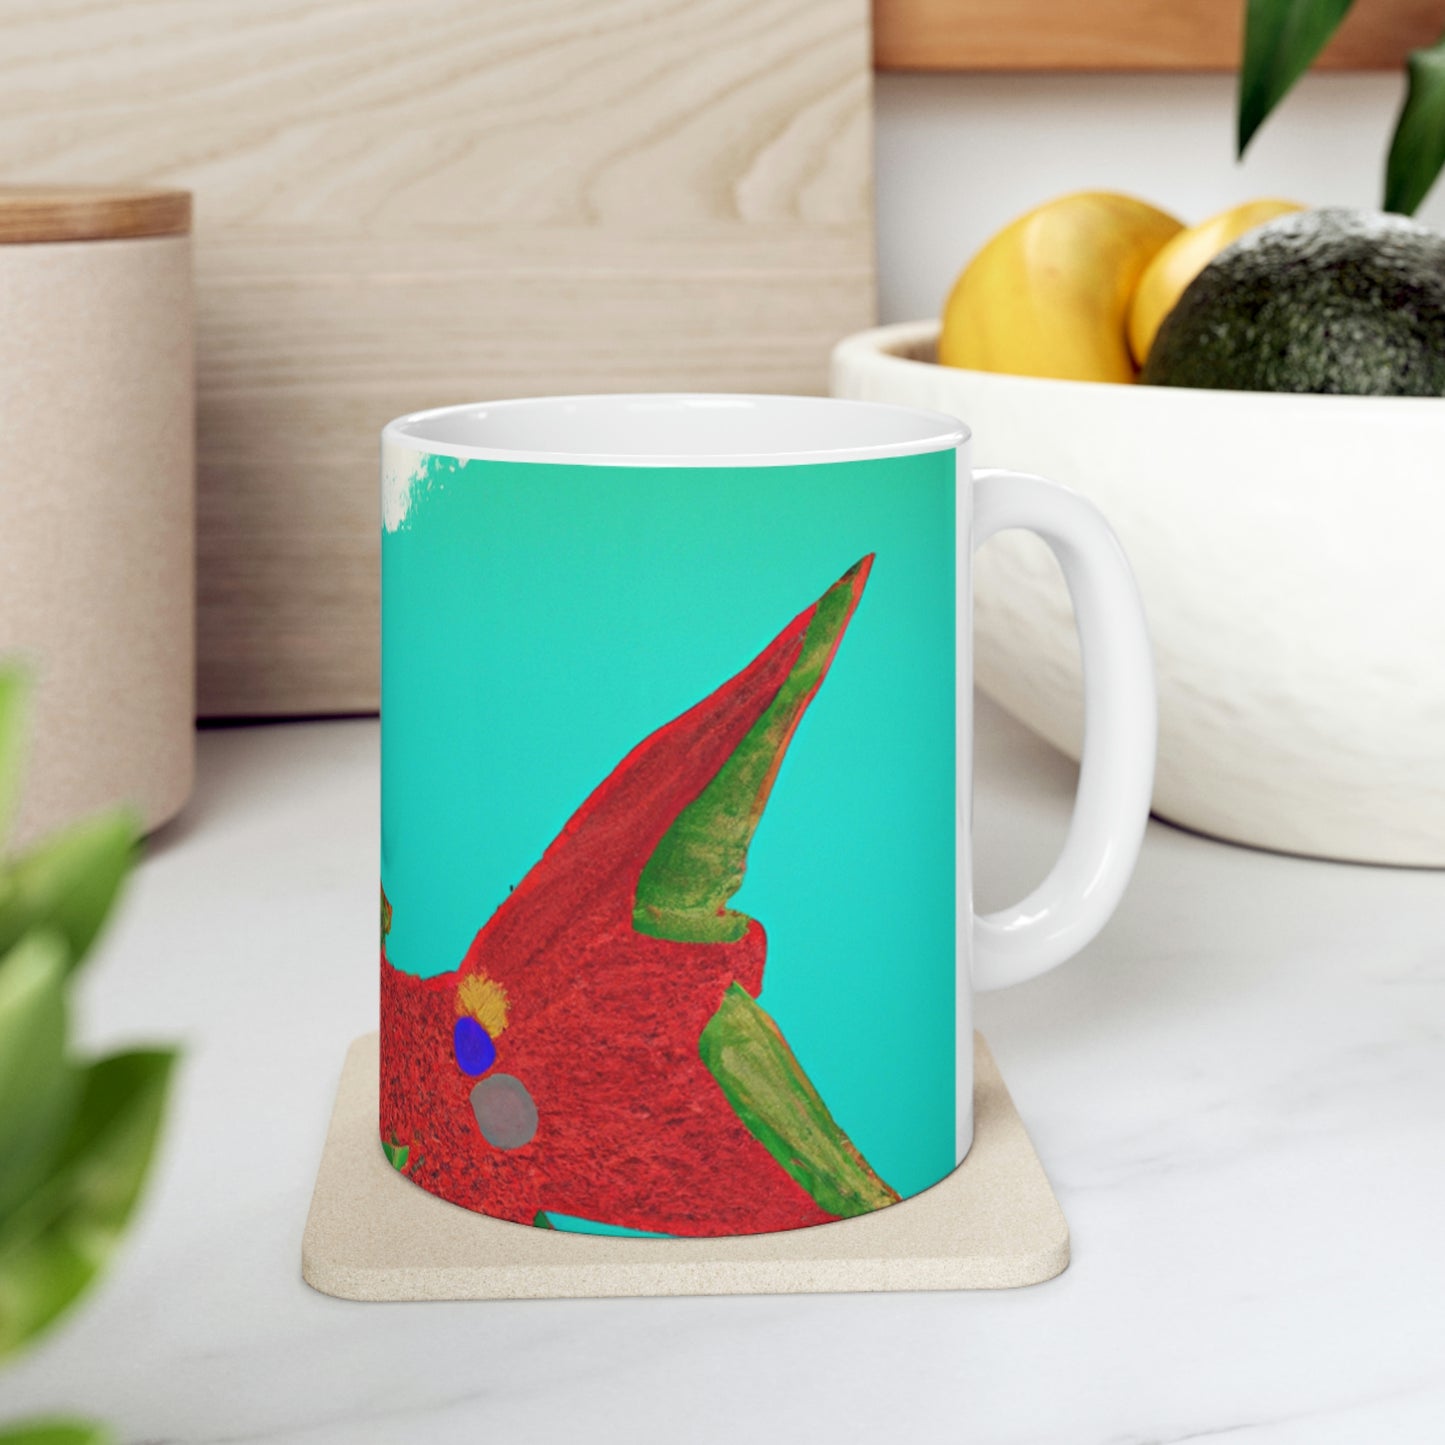 The Mysterious Flying Fish and Its Enigmatic Secret - The Alien Ceramic Mug 11 oz